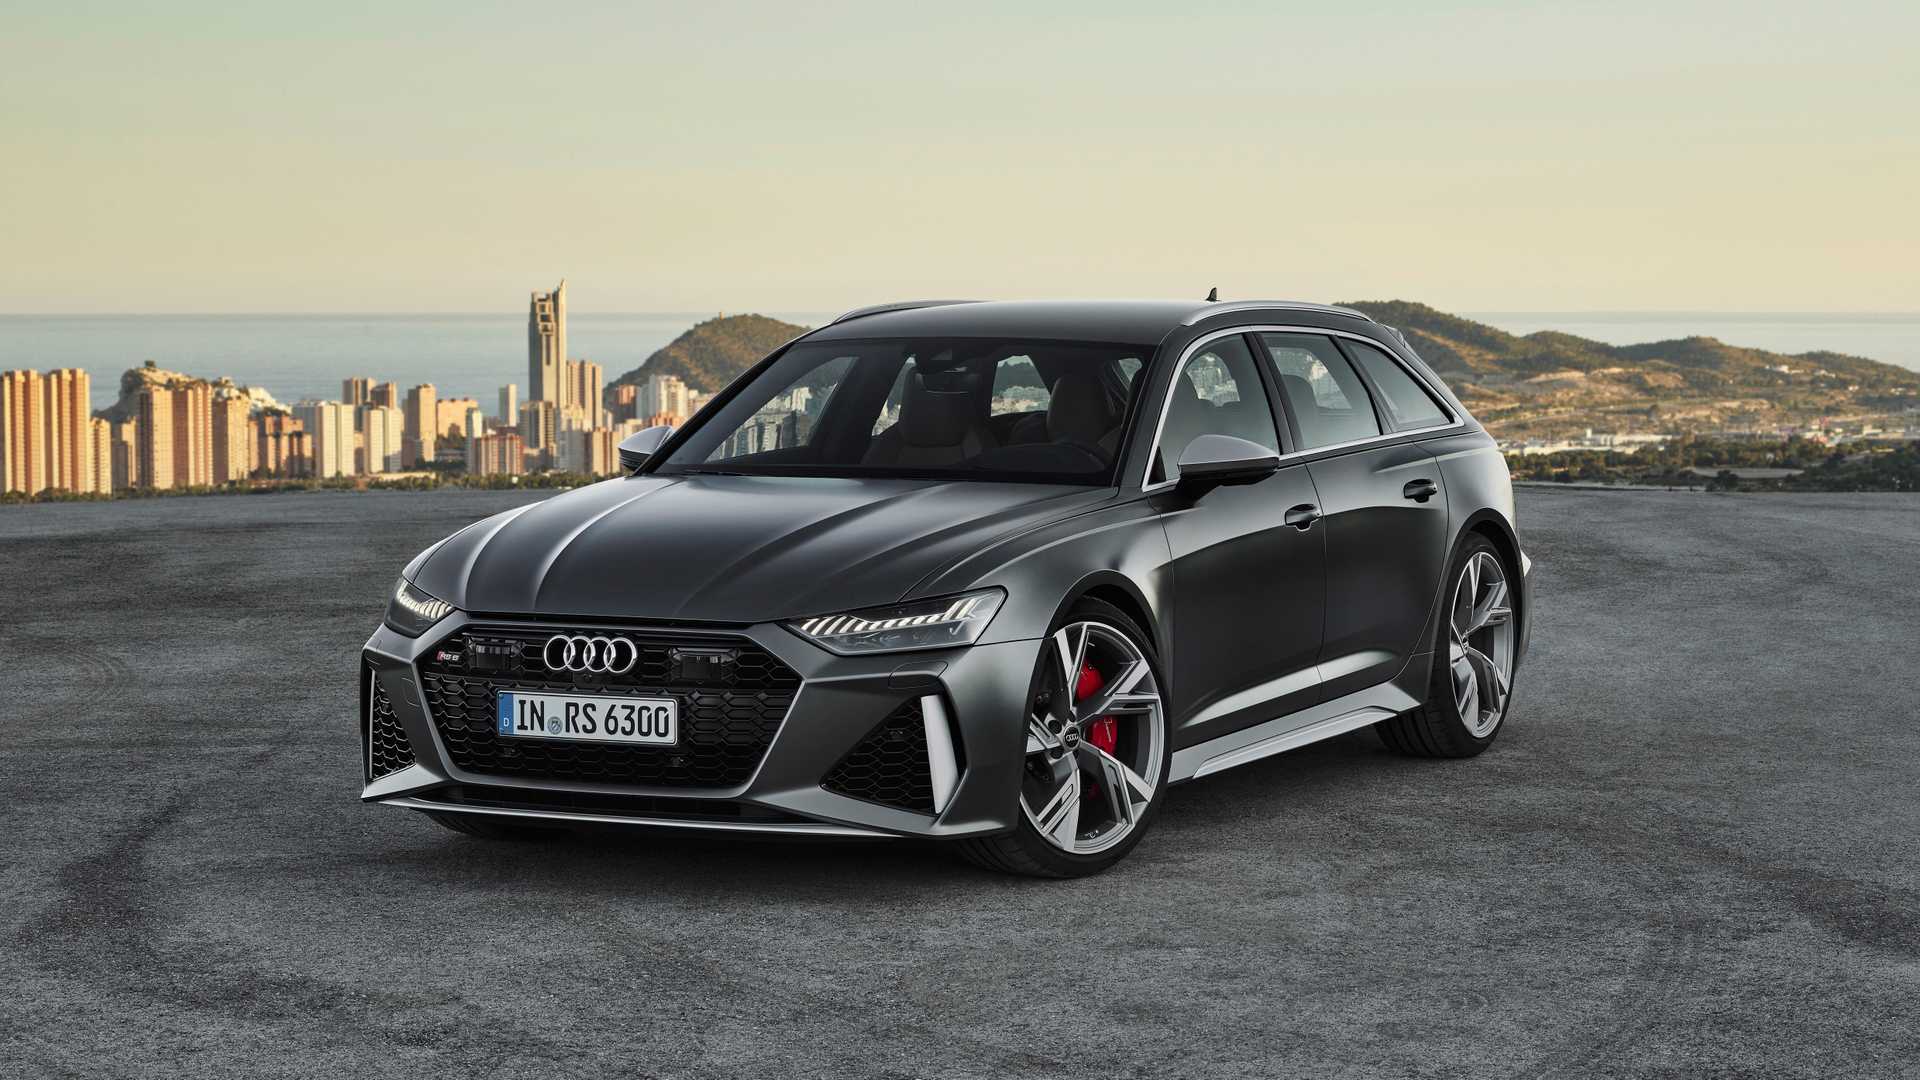 Audi RS 6 Avant News and Reviews